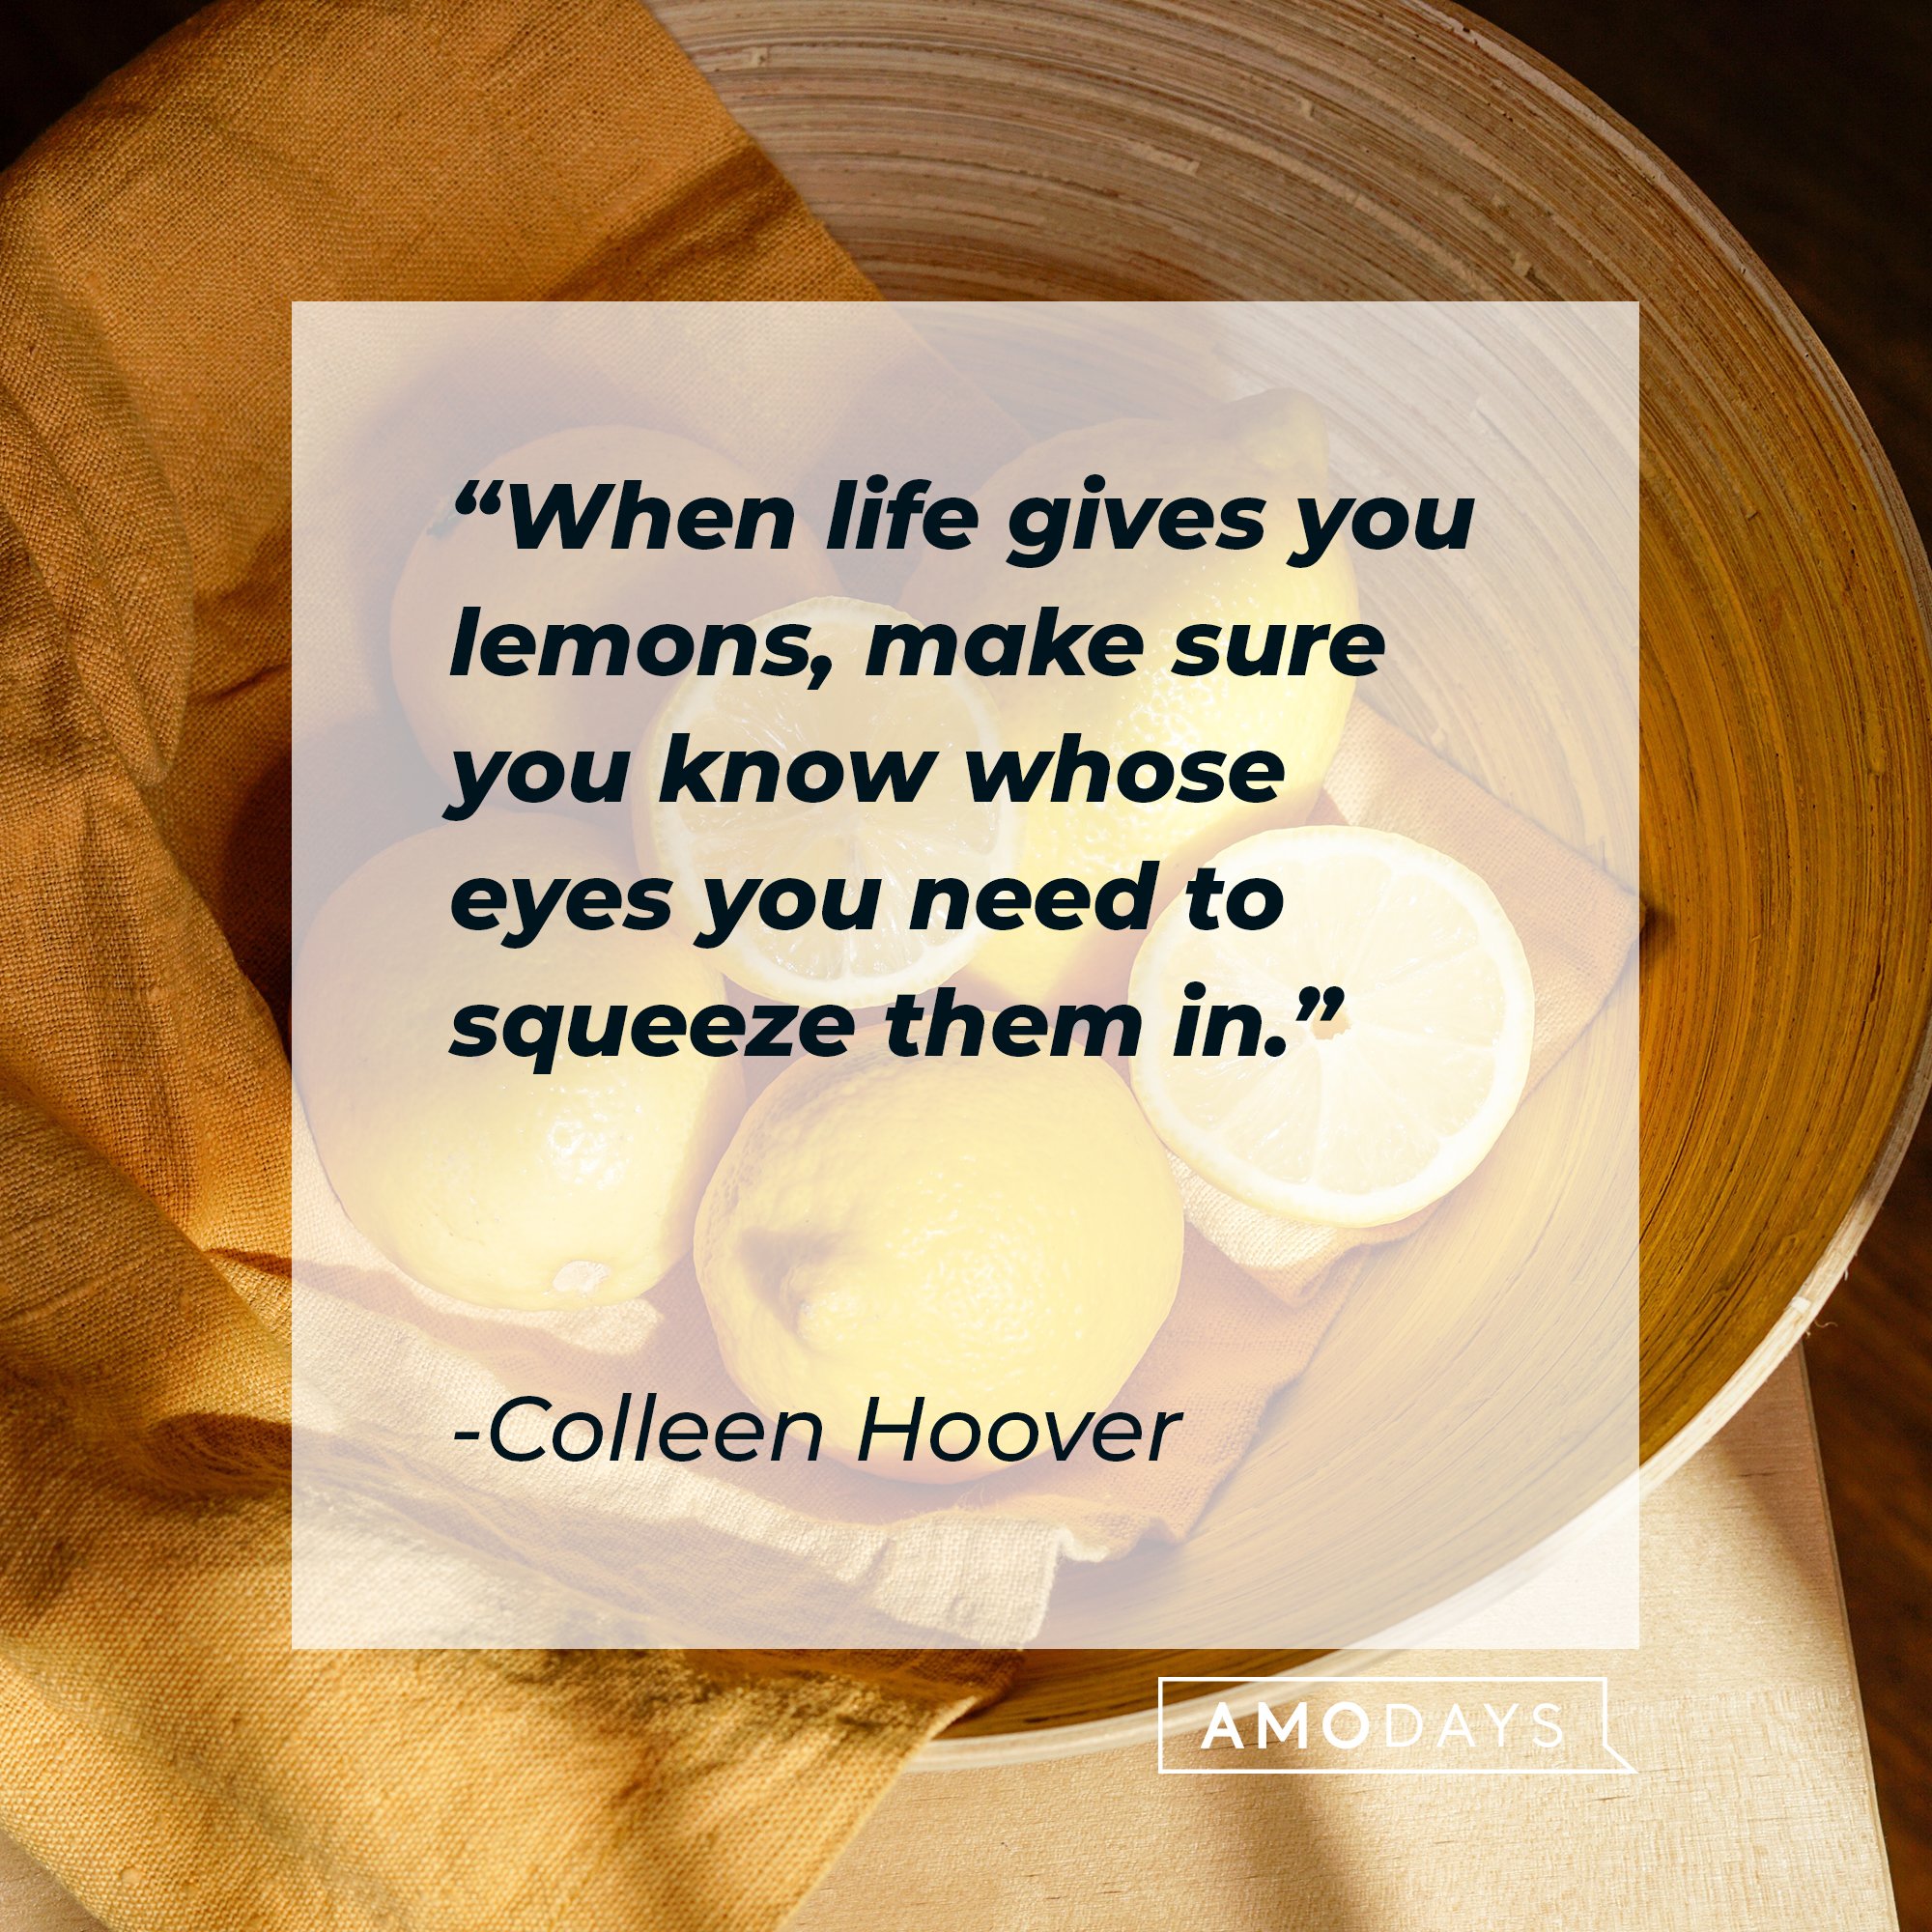 Colleen Hoover’s quote: "When life gives you lemons, make sure you know whose eyes you need to squeeze them in." | Image: AmoDays 